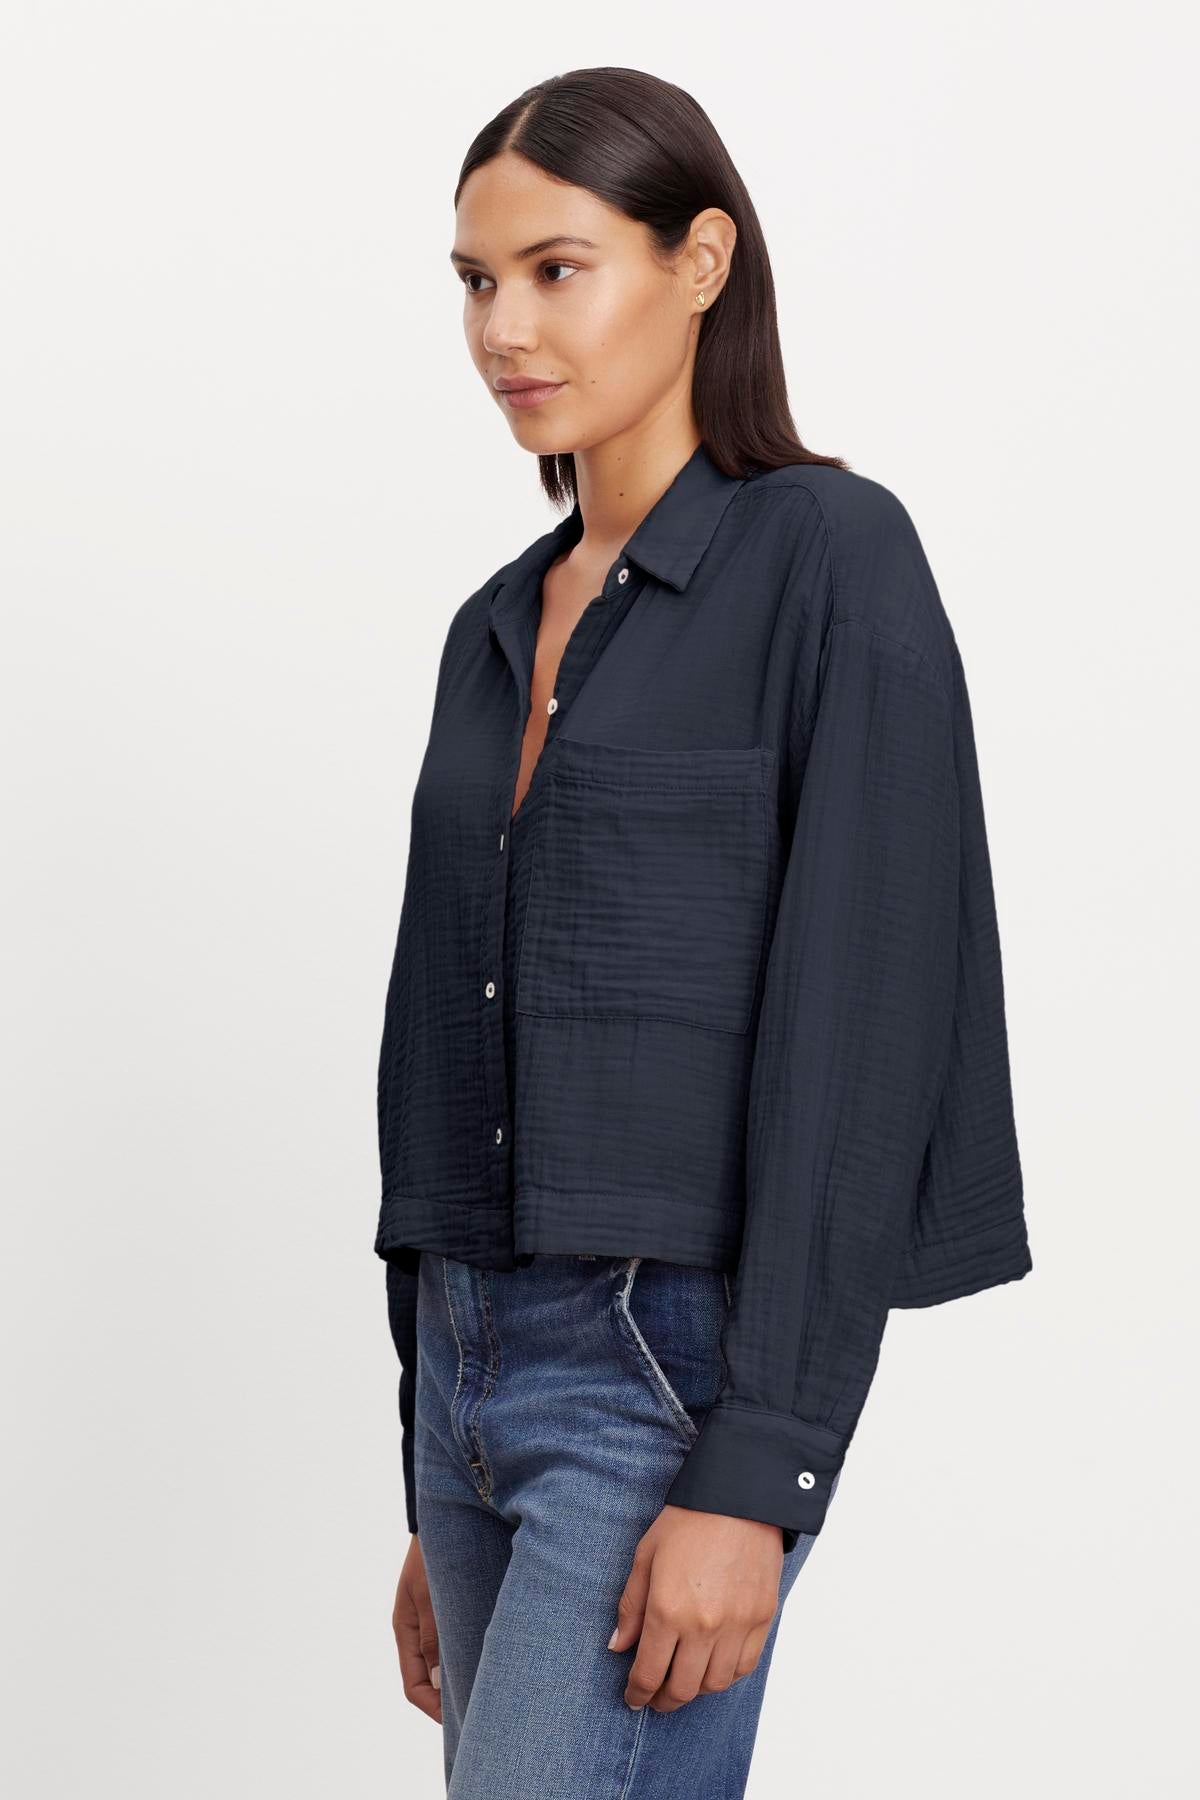 A woman wearing a dark Velvet by Graham & Spencer LANA COTTON GAUZE BUTTON-UP SHIRT and jeans stands in a side pose.-36462890254529